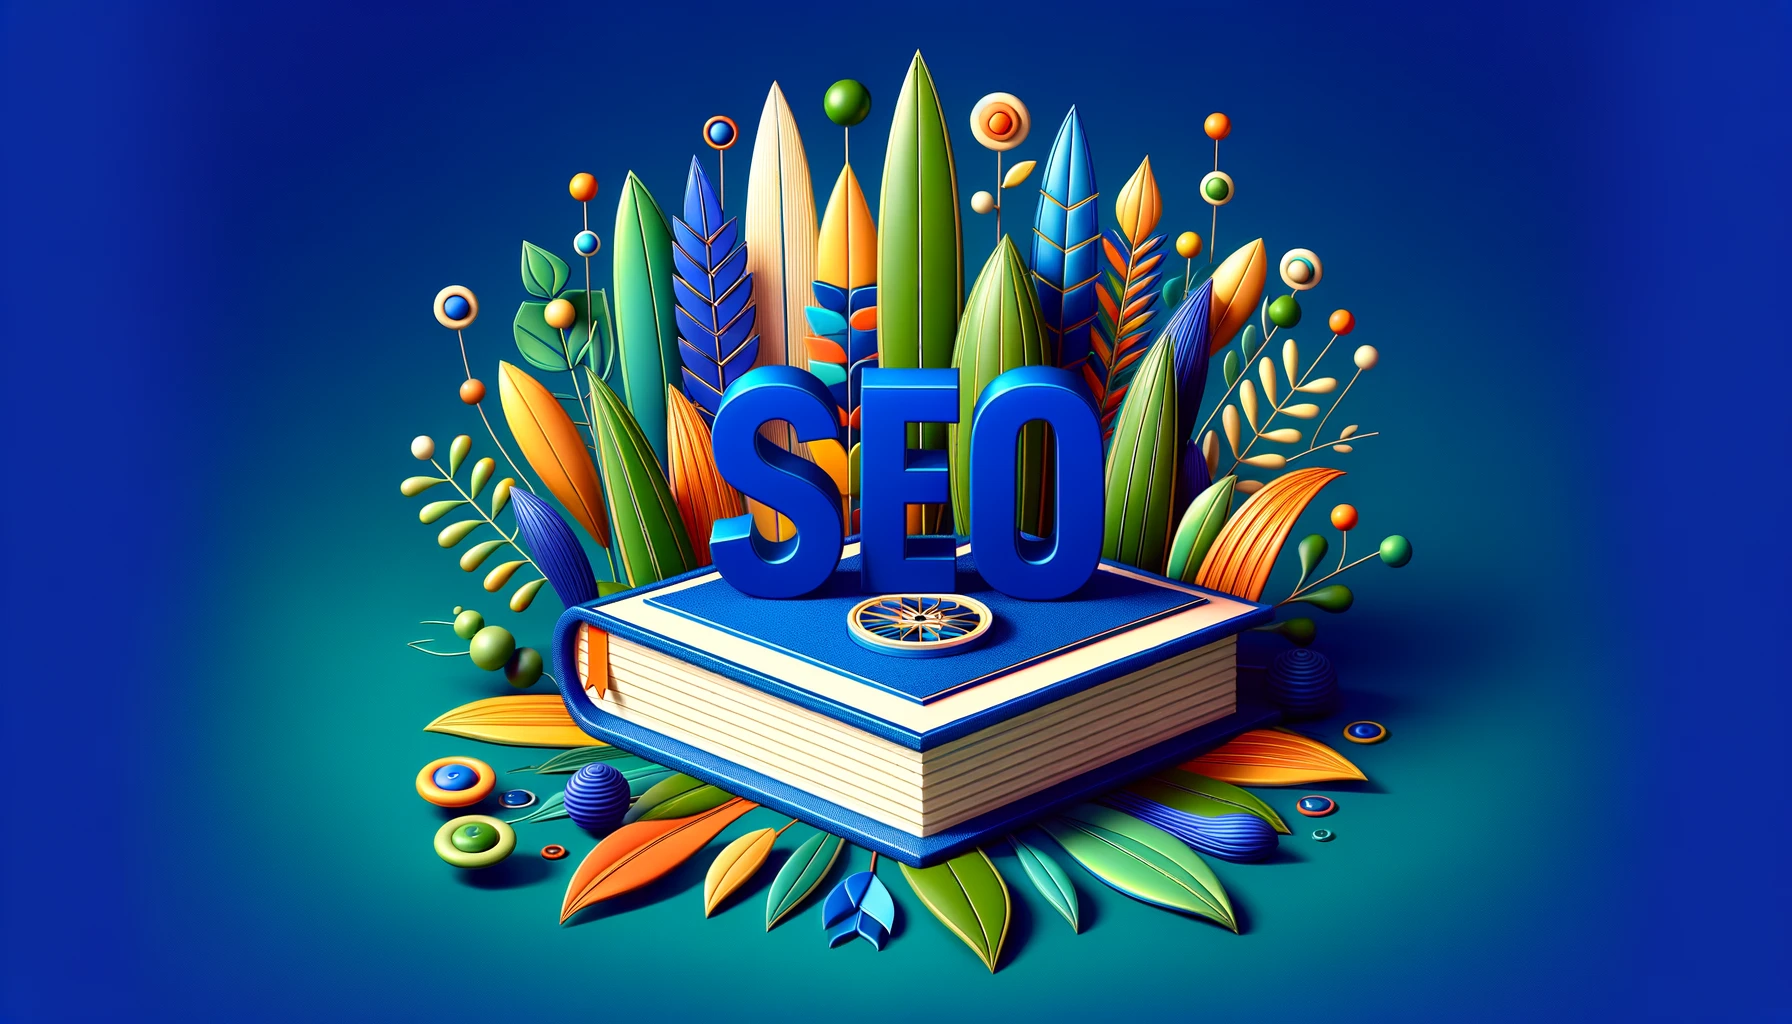 seo acronyms cover - seo on top of a book with plants